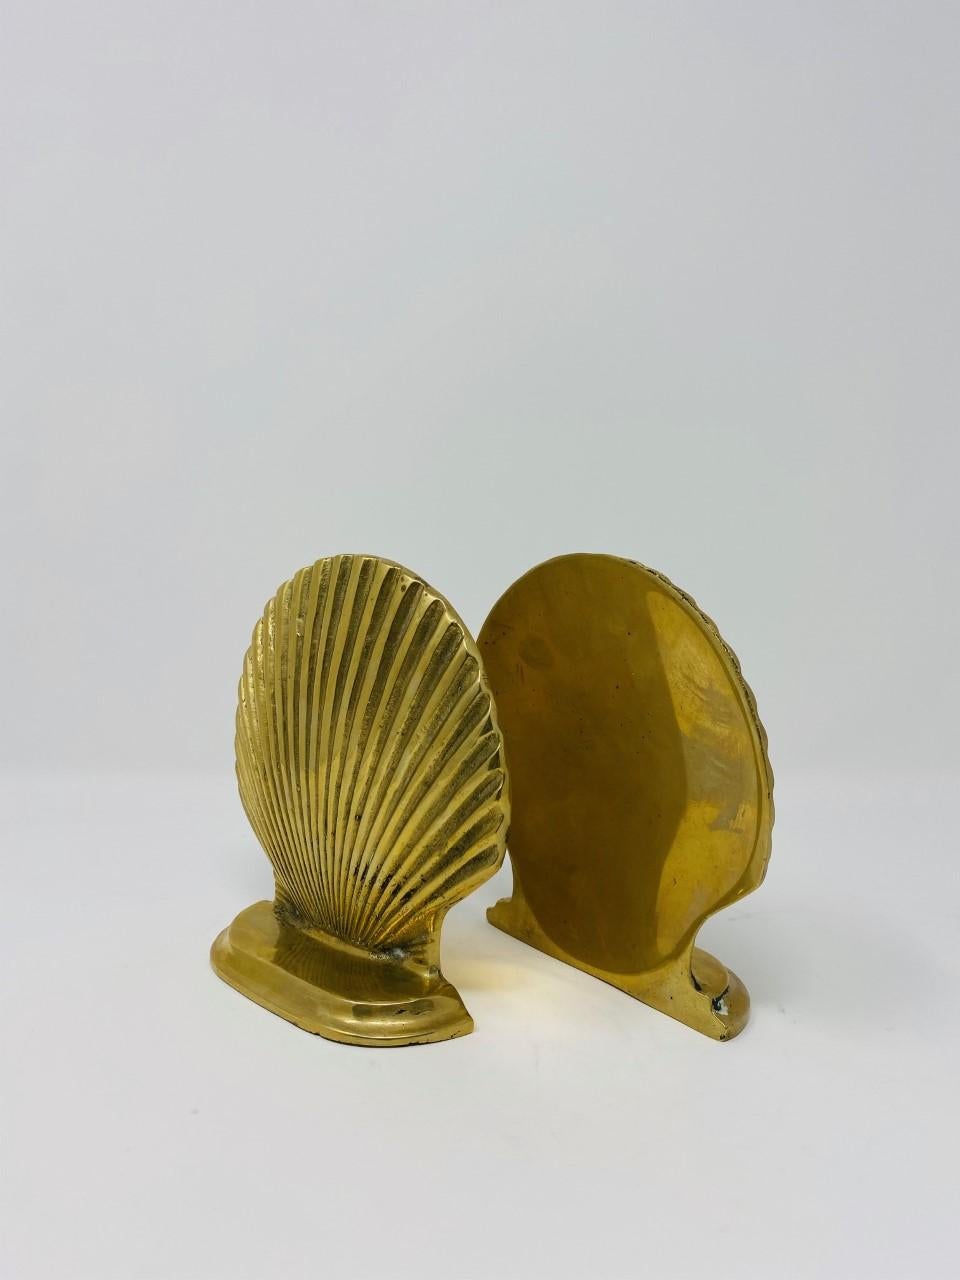 American Pair of Vintage Brass Sea Shell Bookends